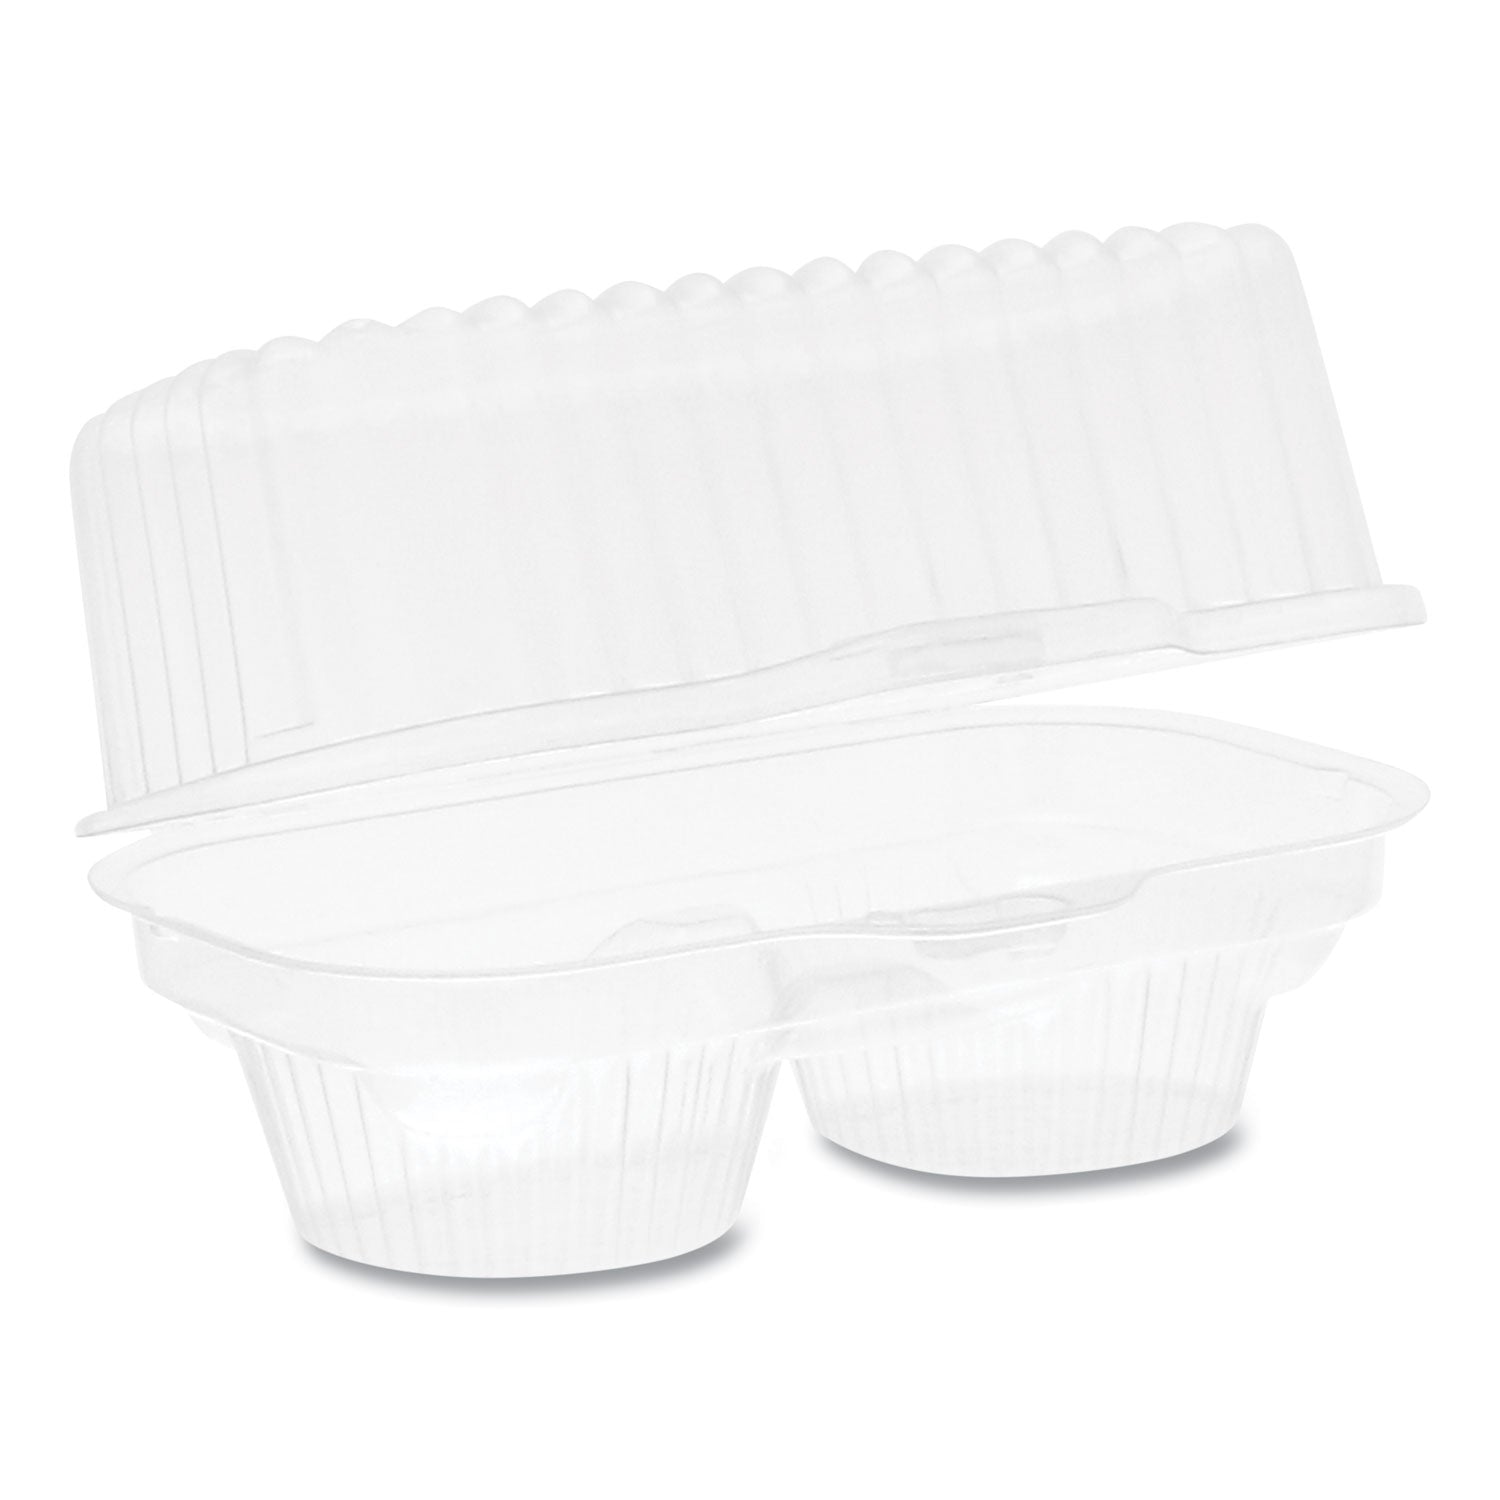 clearview-bakery-cupcake-container-2-compartment-675-x-4-x-4-clear-plastic-100-carton_pct2002 - 1